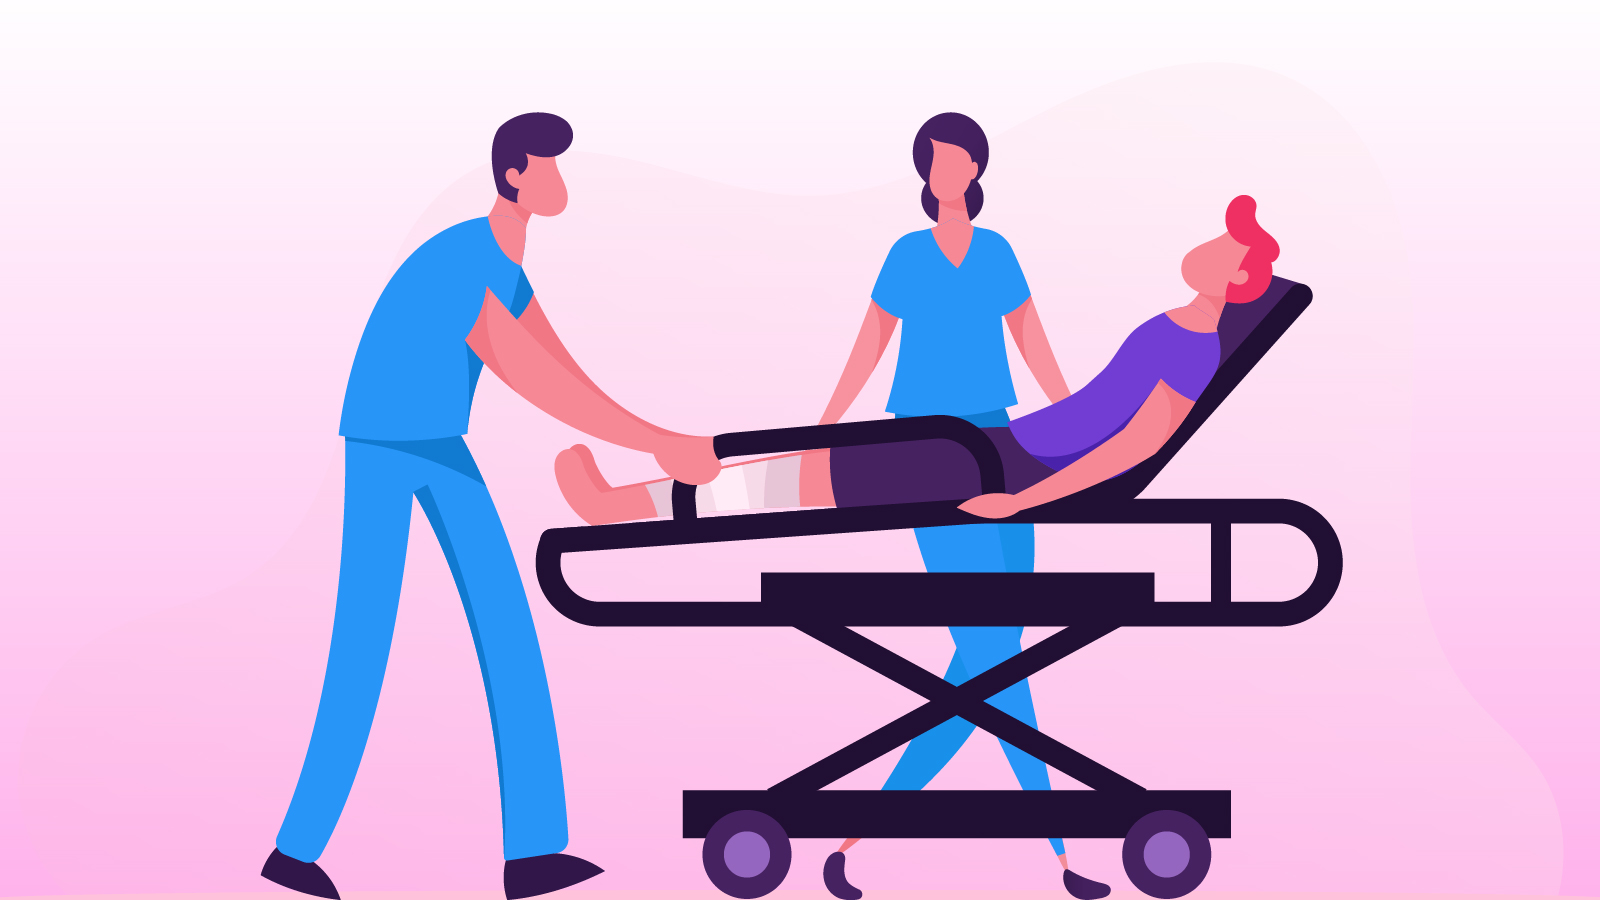 illustration of medicos attending to injured person